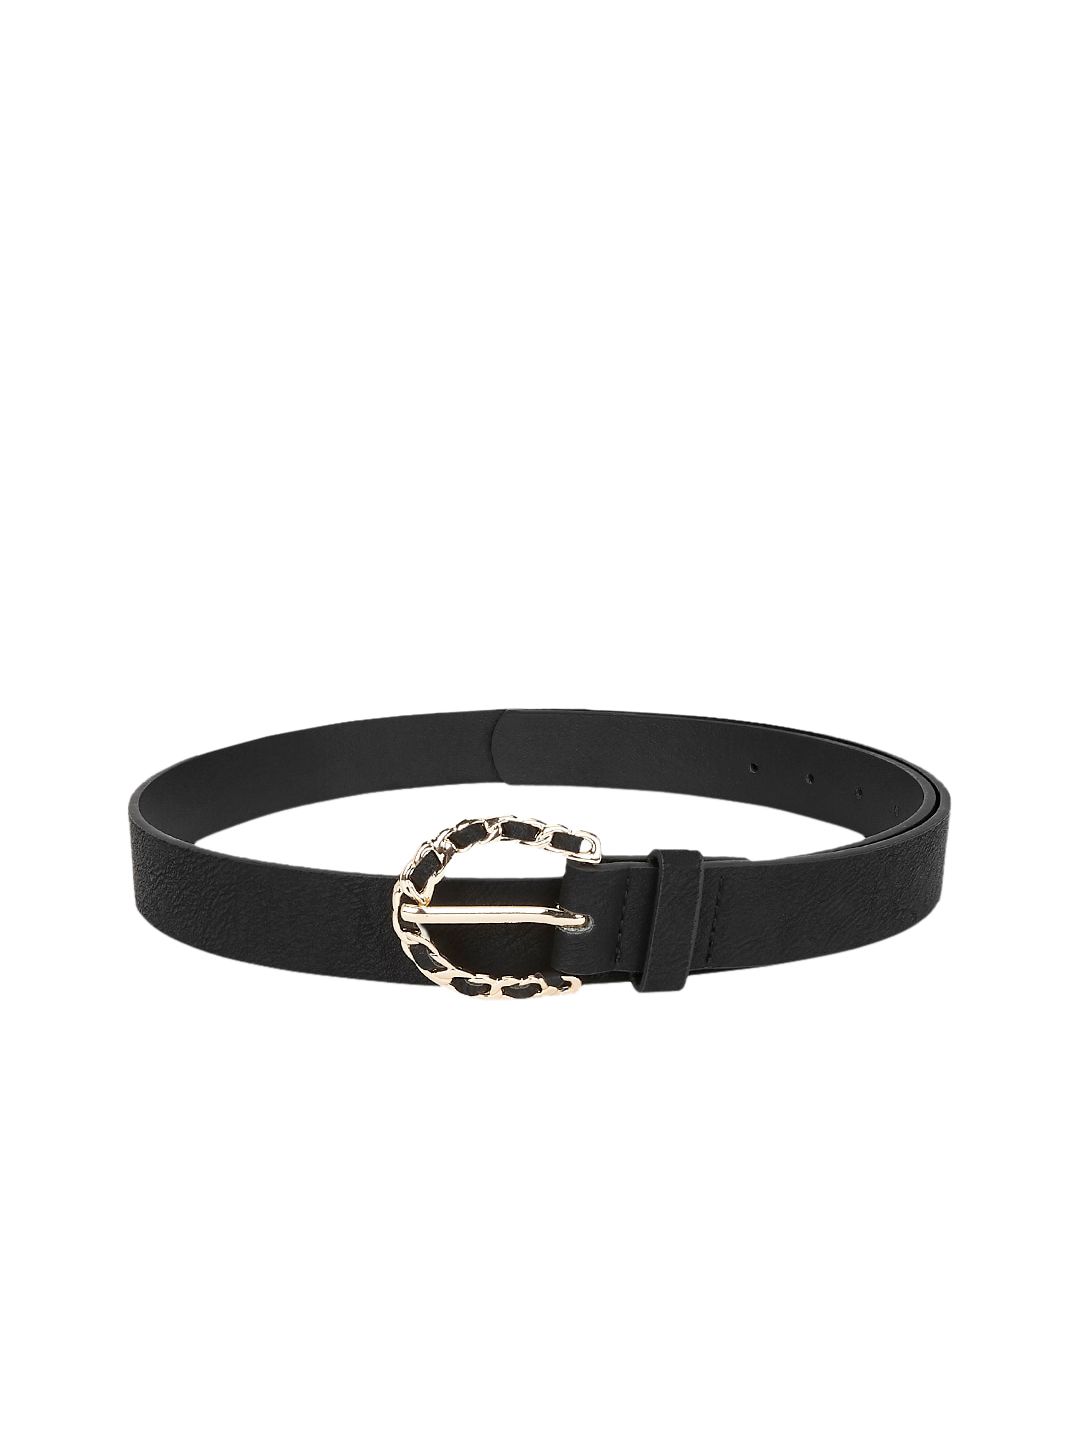 Forever Glam by Pantaloons Women Black PU Belt Price in India